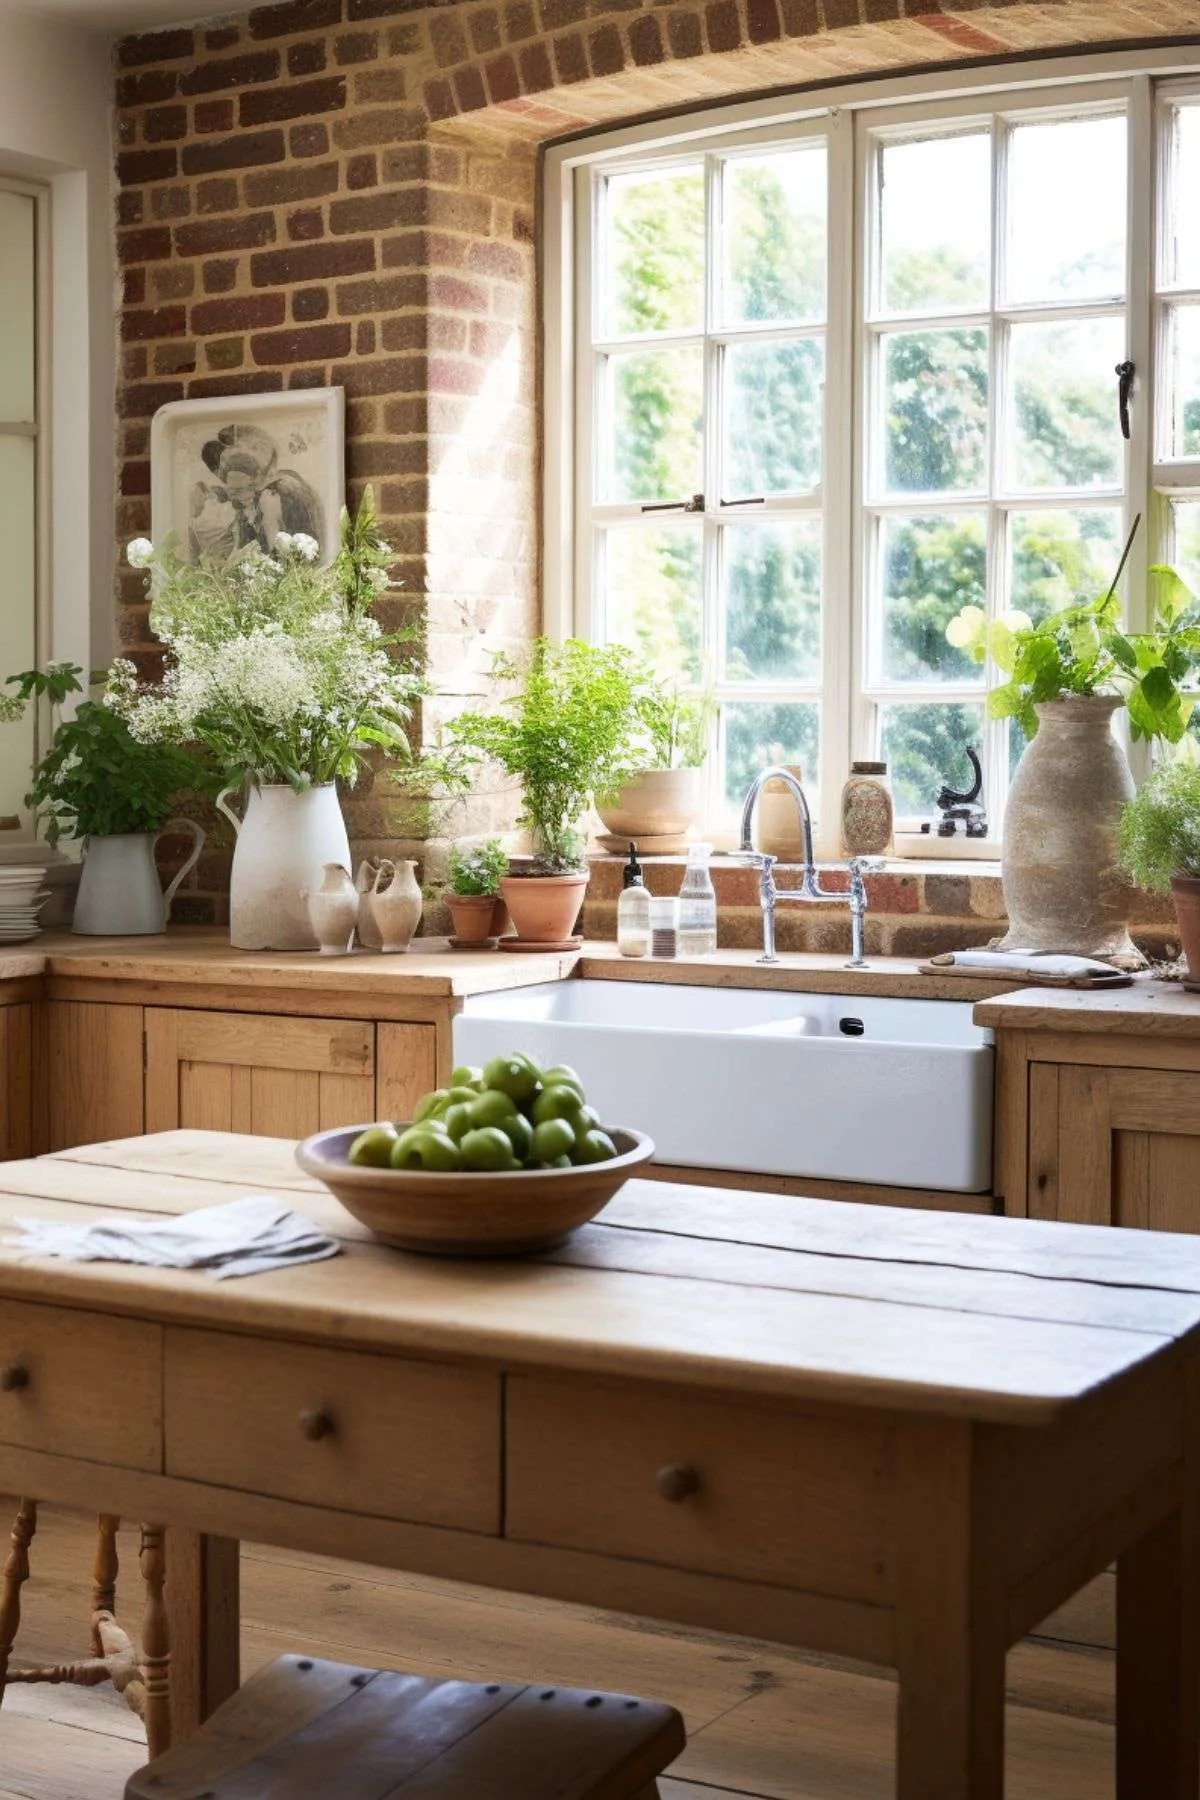 10 Budget Kitchen Upgrades That Can Help You Create a Wellness-Oriented Space